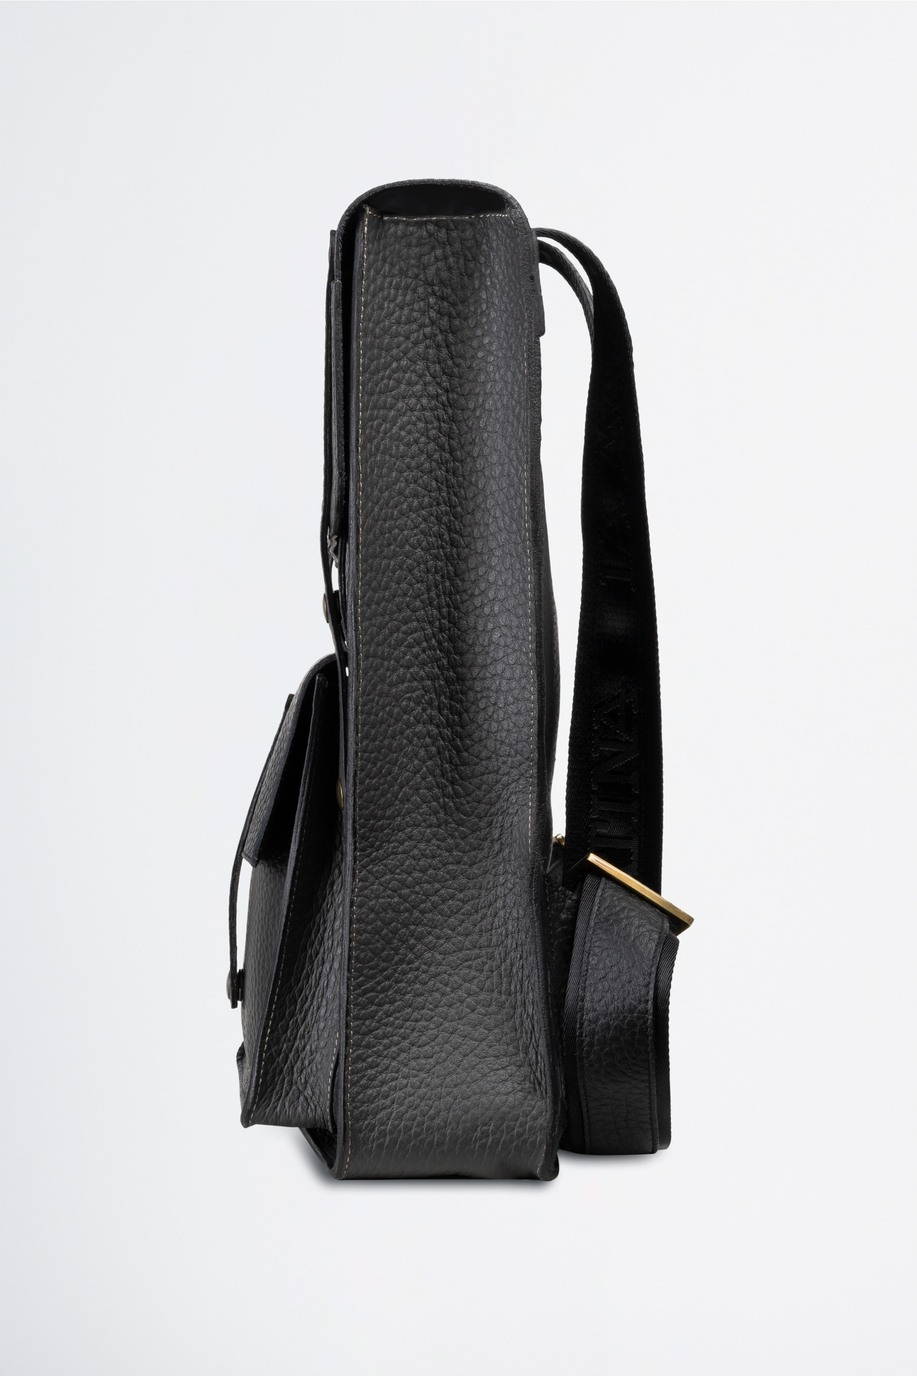 Backpack in calf leather leather - Accessories | La Martina - Official Online Shop